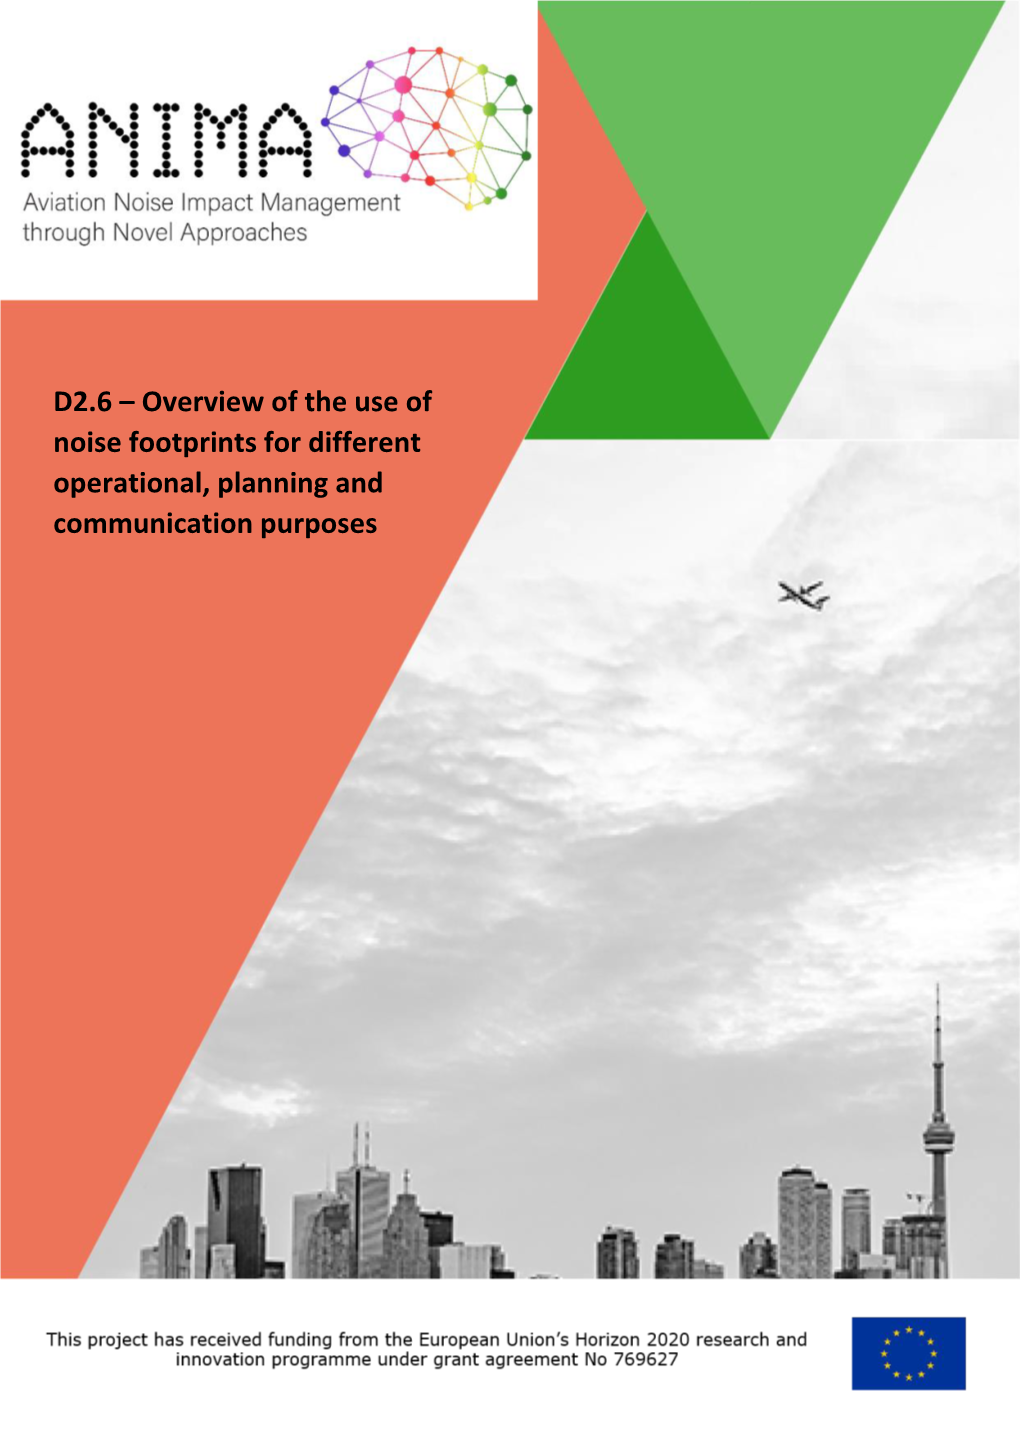 D2.6 – Overview of the Use of Noise Footprints for Different Operational, Planning and Communication Purposes